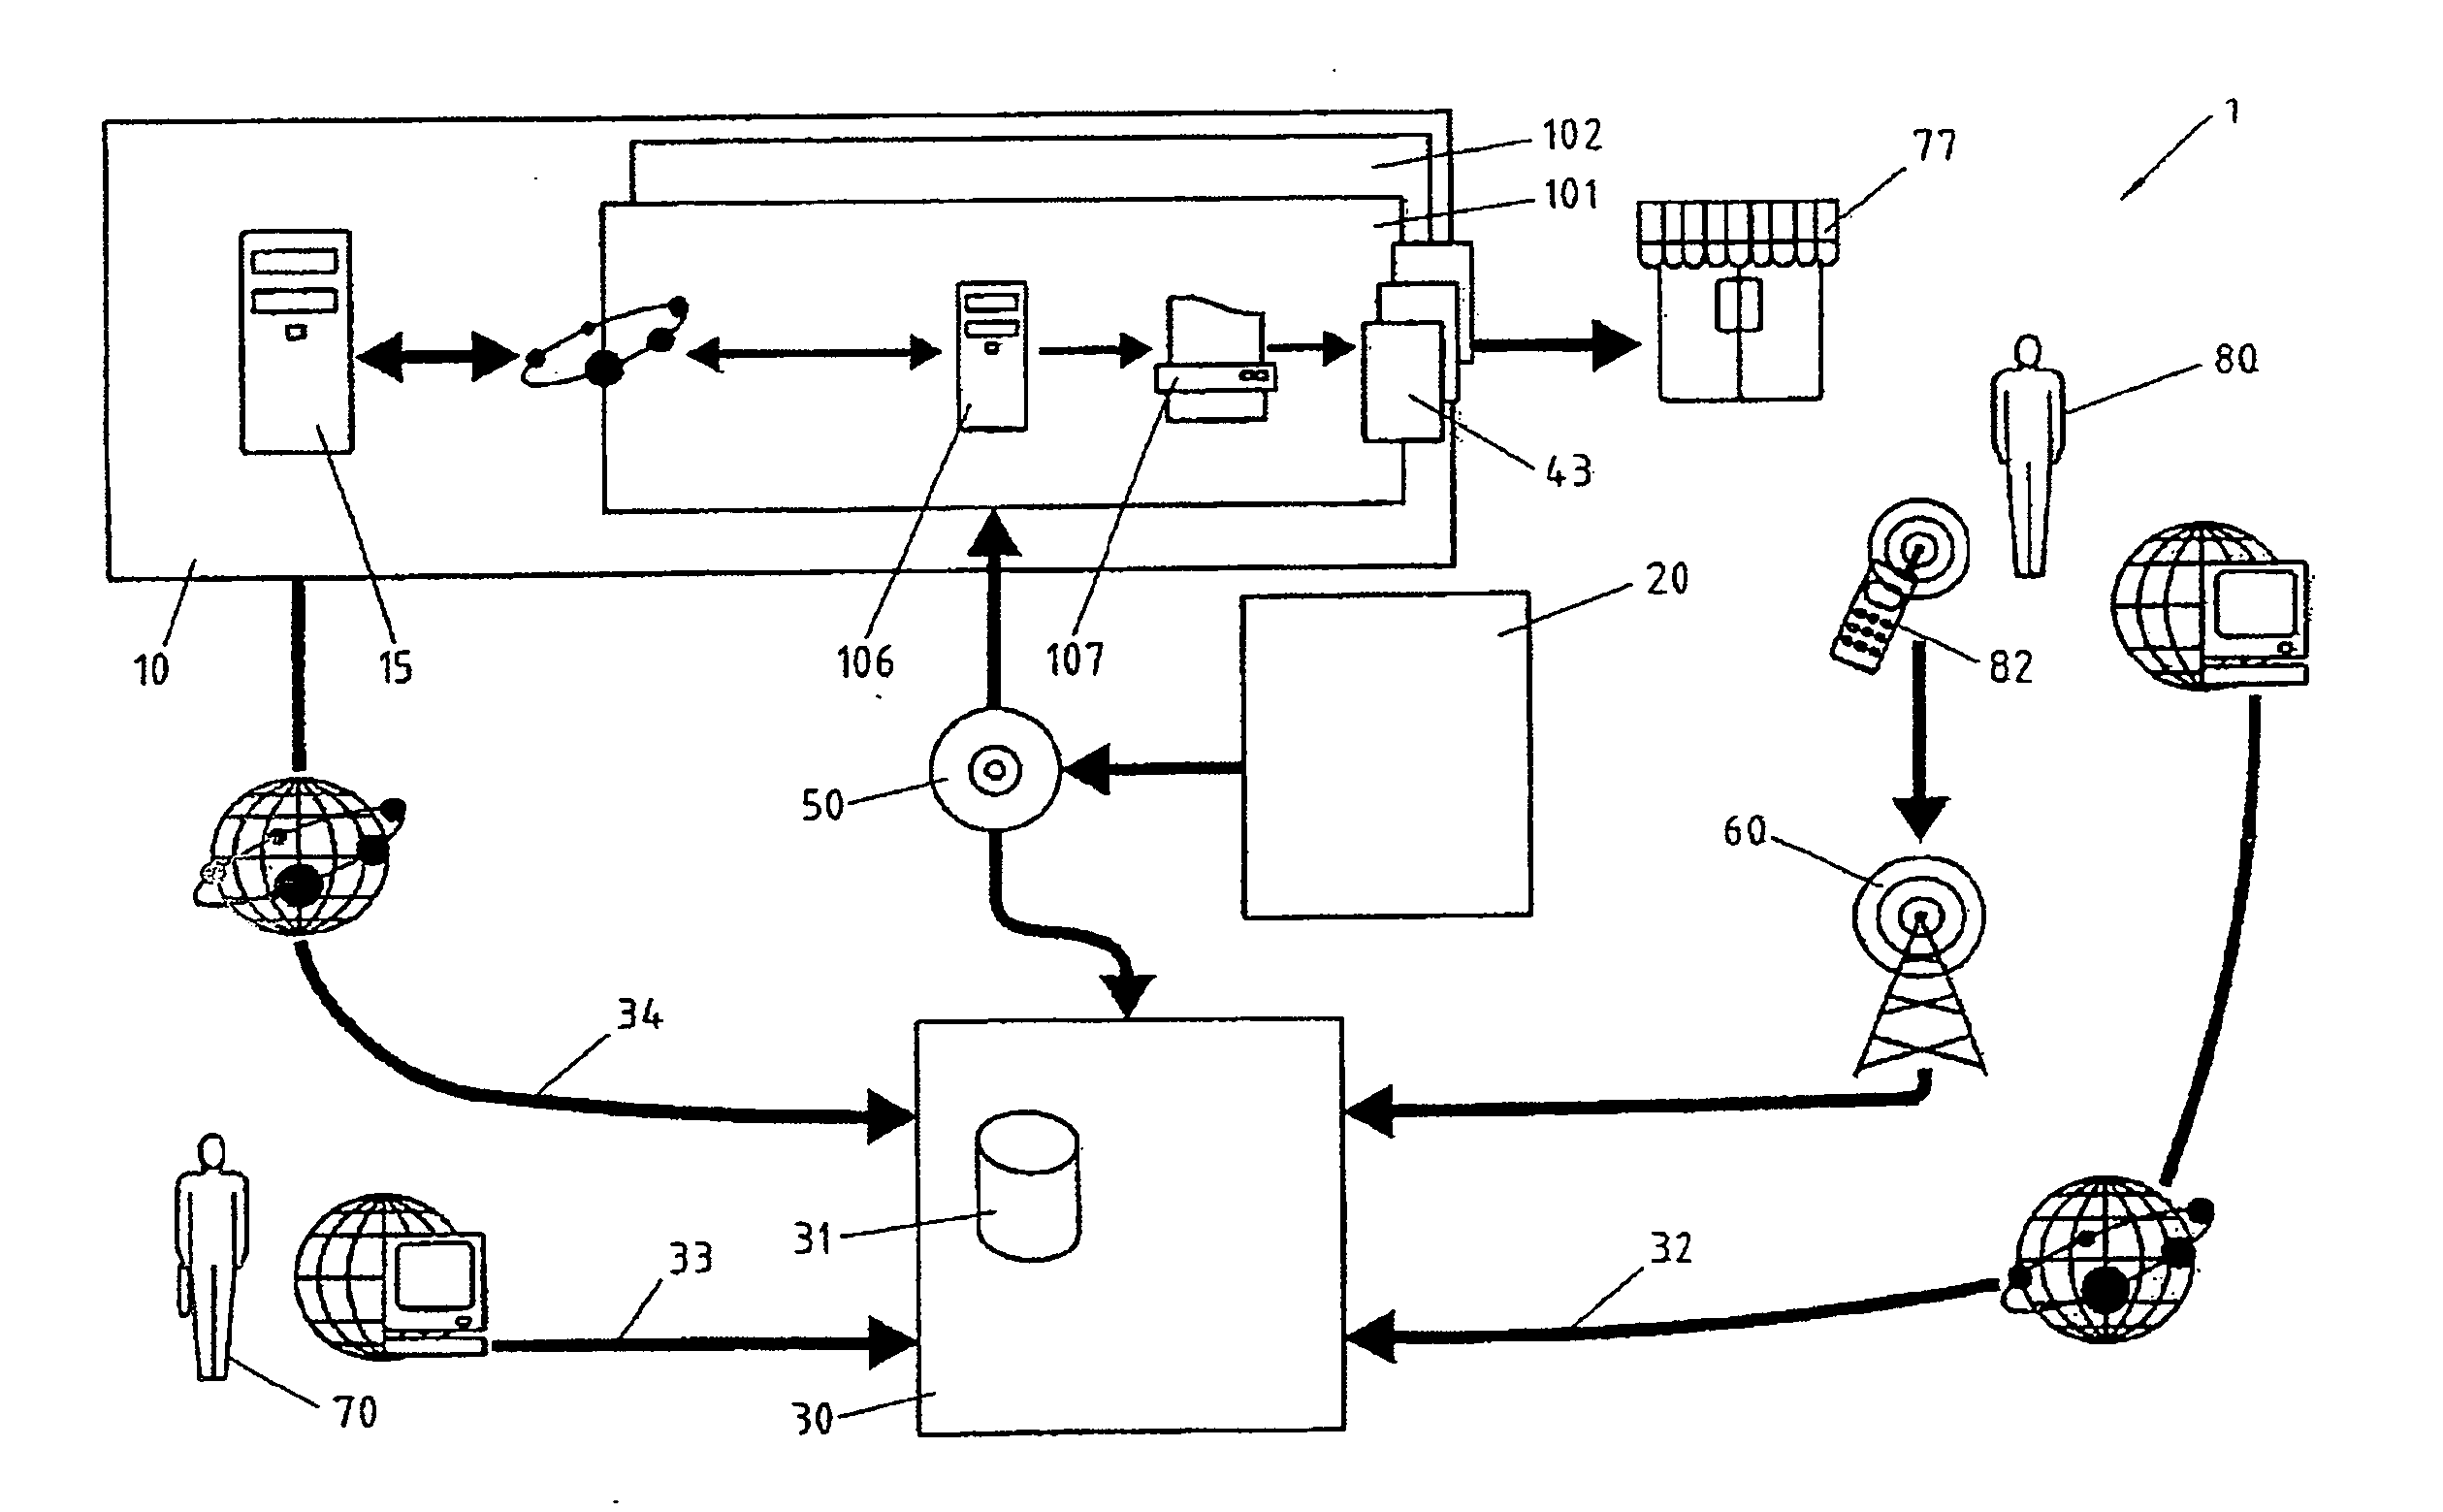 Methods and Systems for Making, Tracking and Authentication of Products